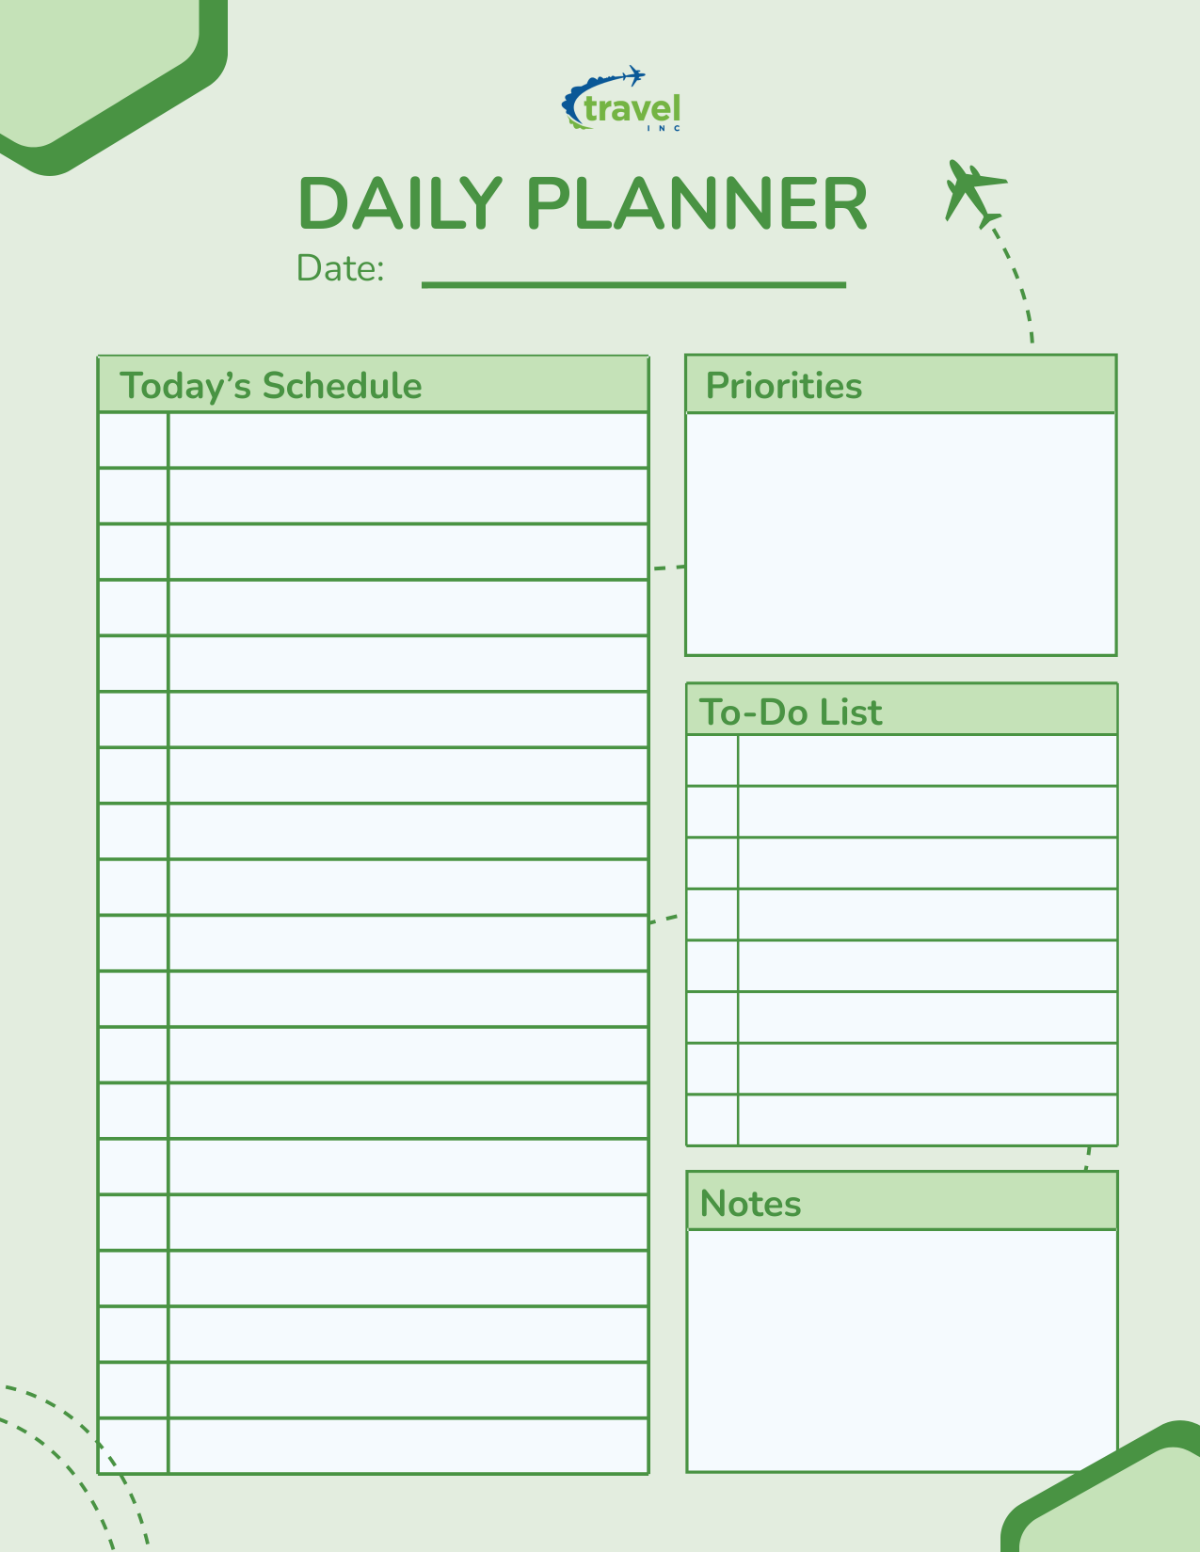 Travel Agency Daily Planner Template